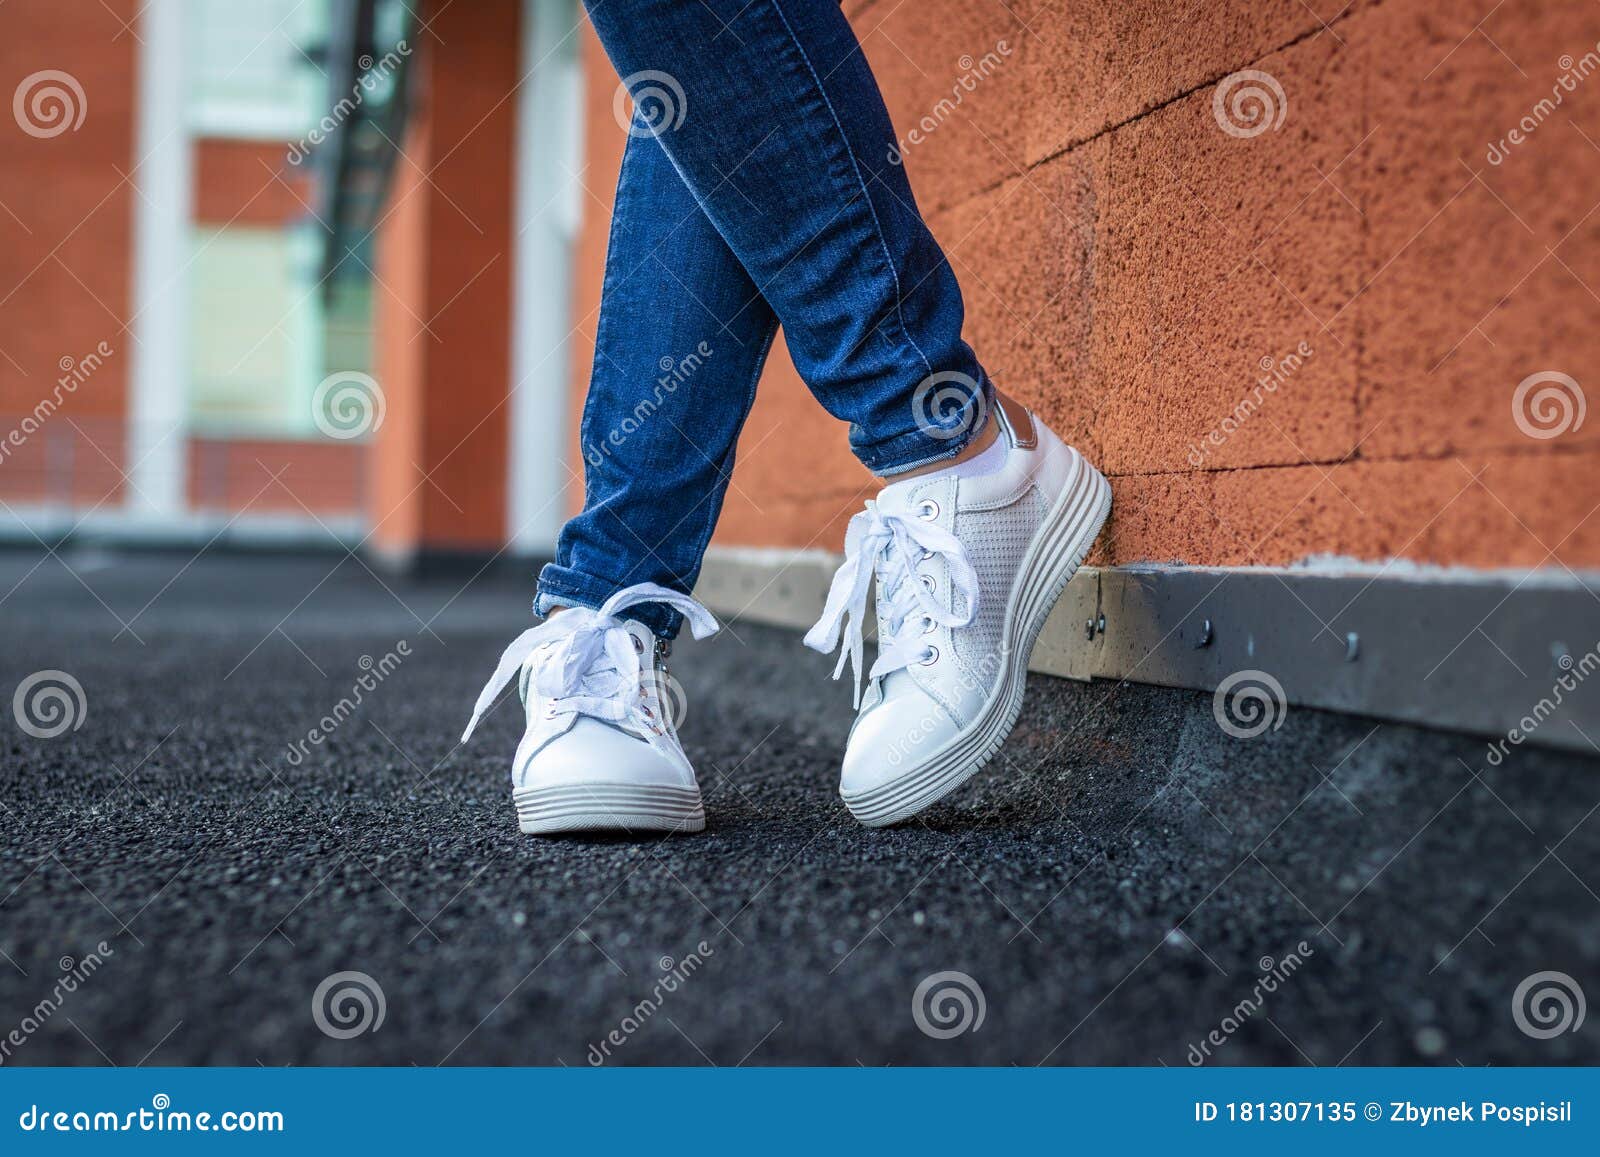 White Sport Shoes. Female Legs Stock Image - Image of legs, leather ...